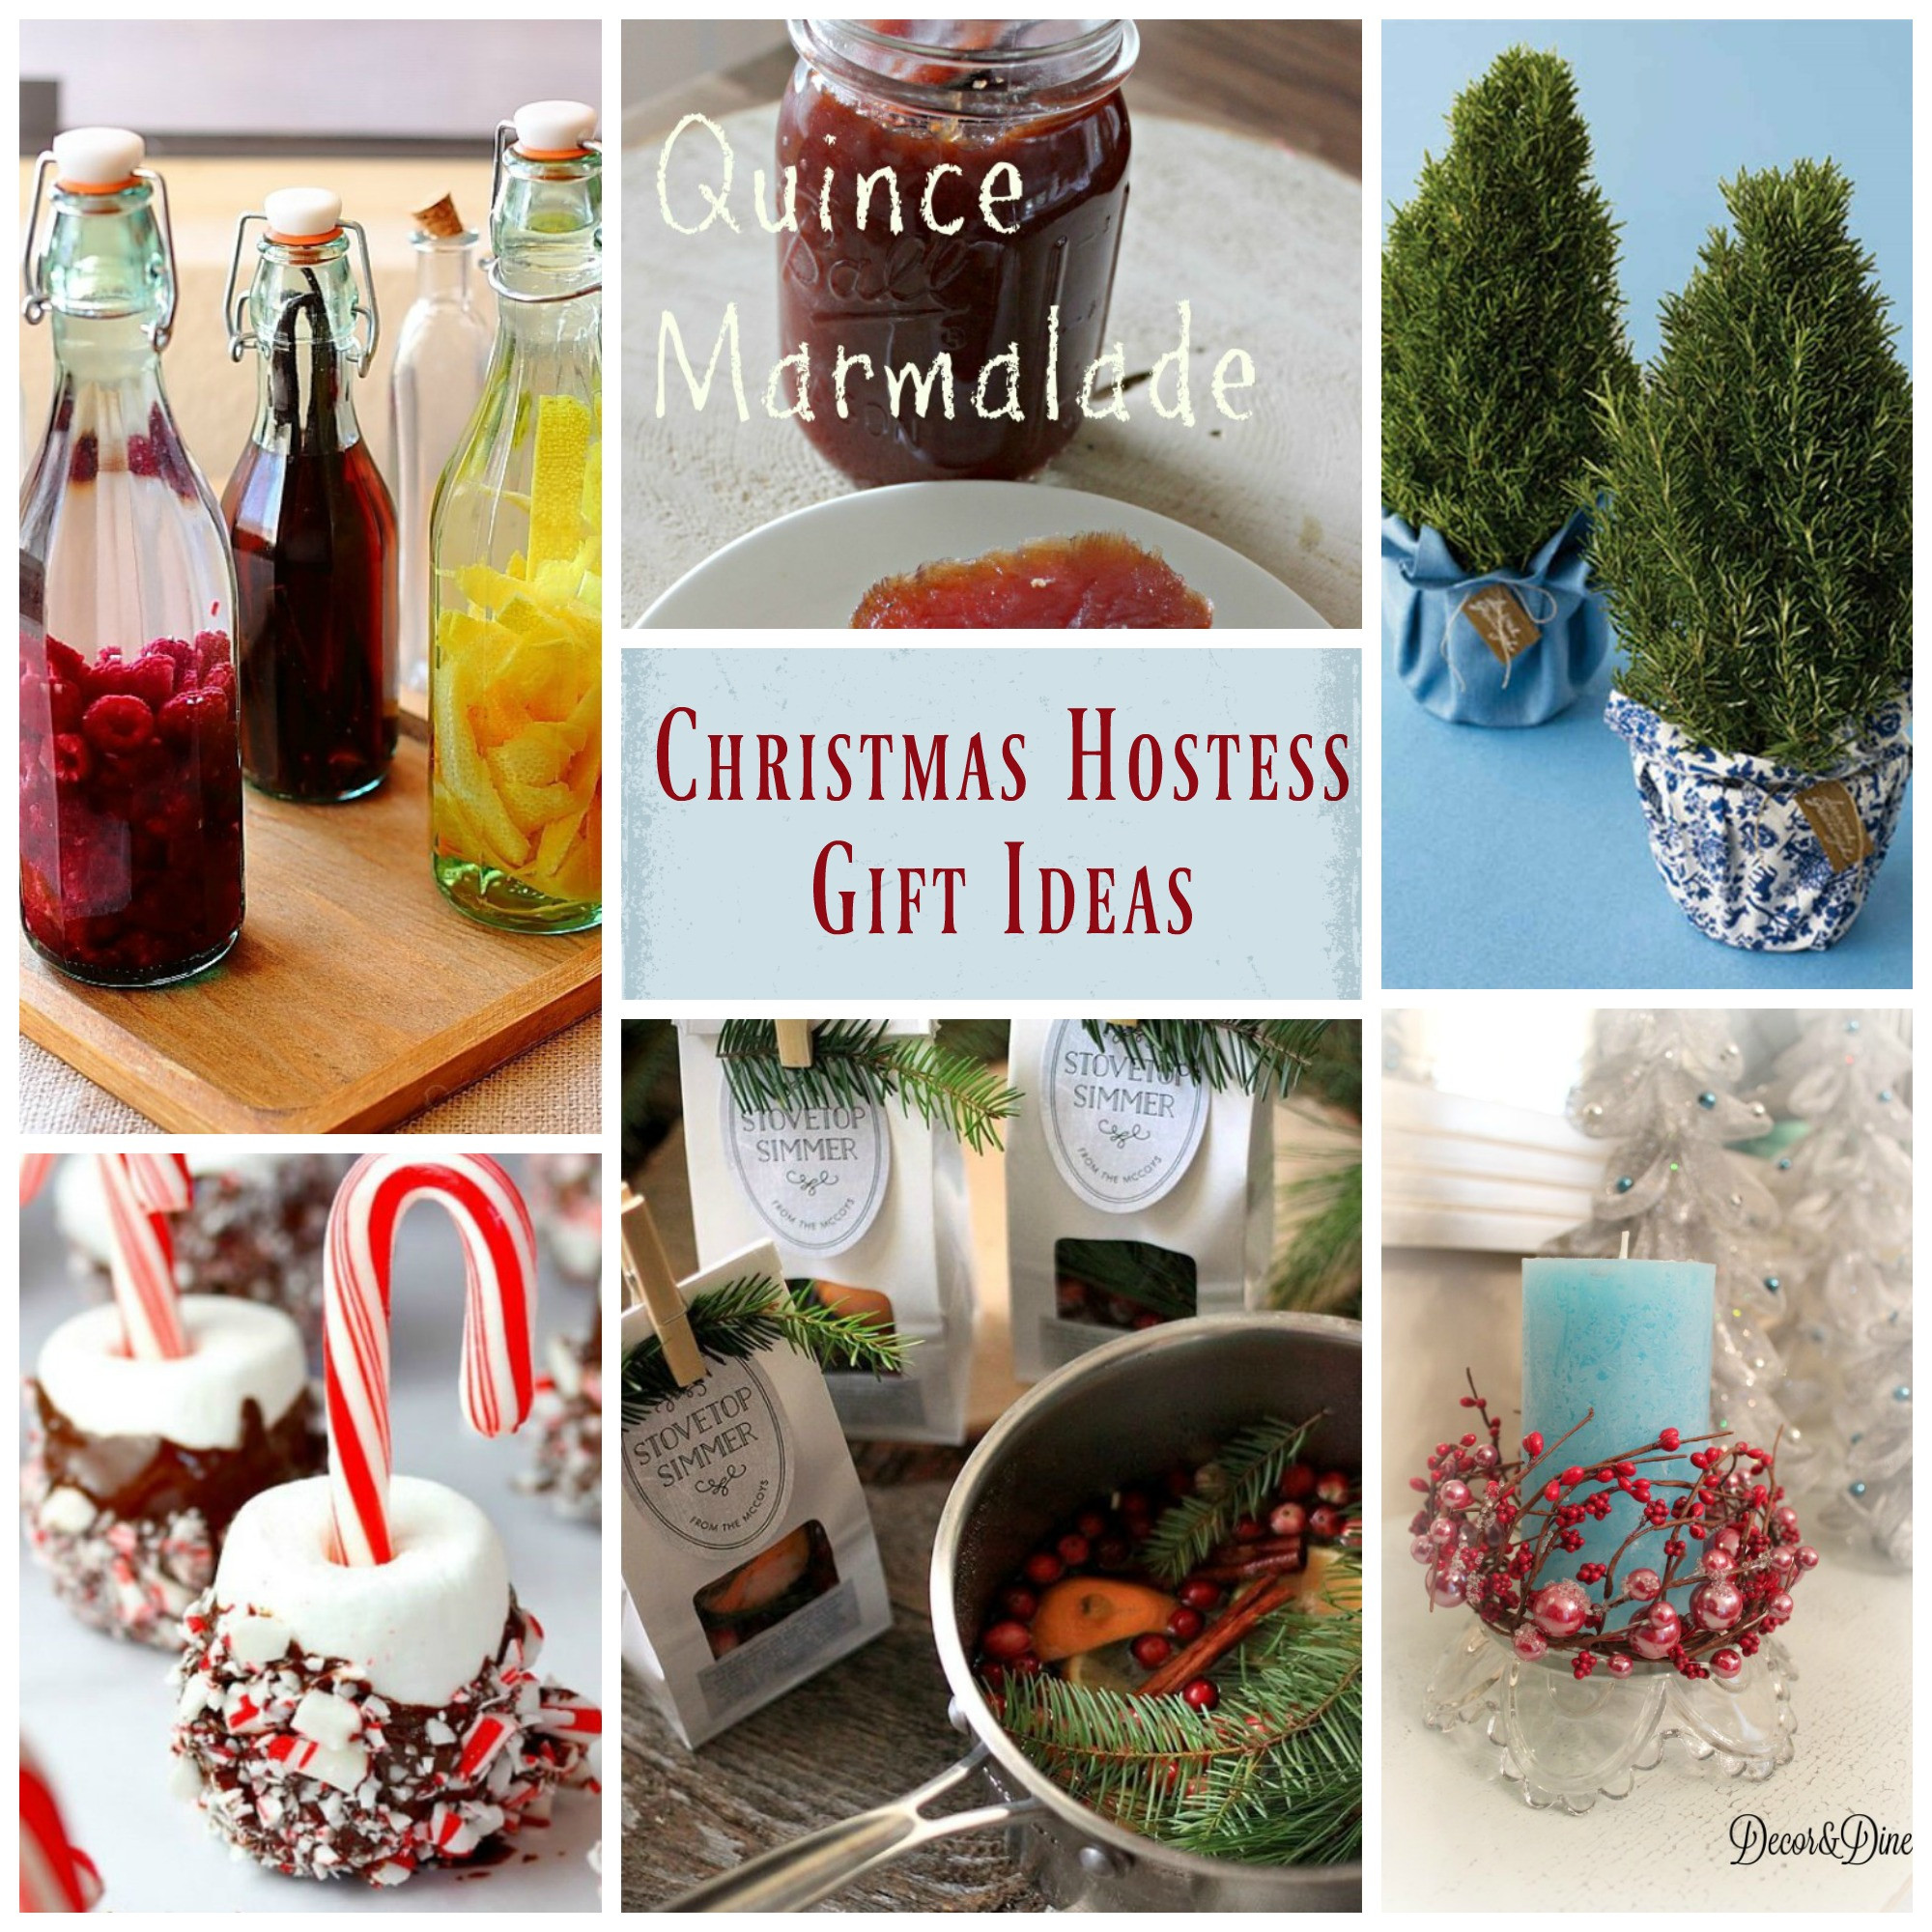 Holiday Party Gift Ideas For The Hostess
 Christmas Hostess Gift Ideas